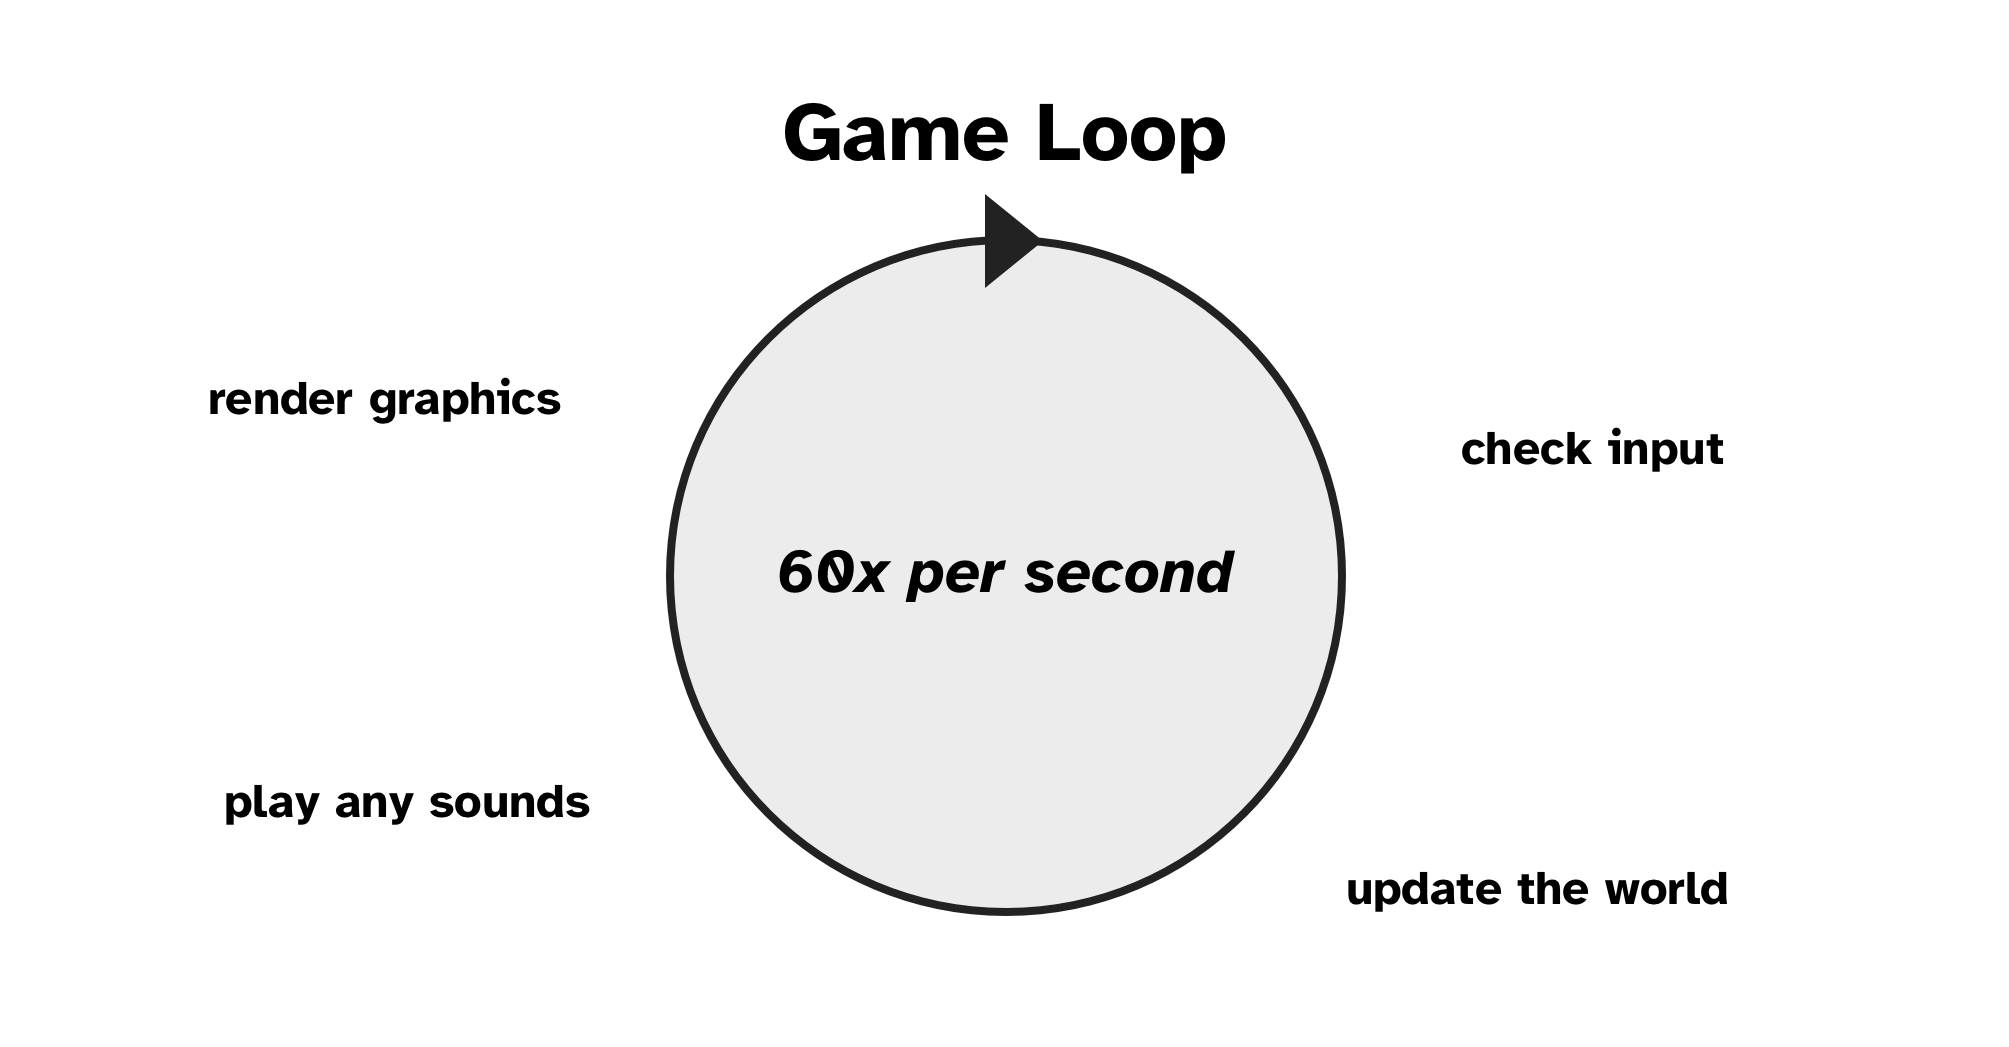 diagram showing game loop running 60x per second handling updating the world and rendering